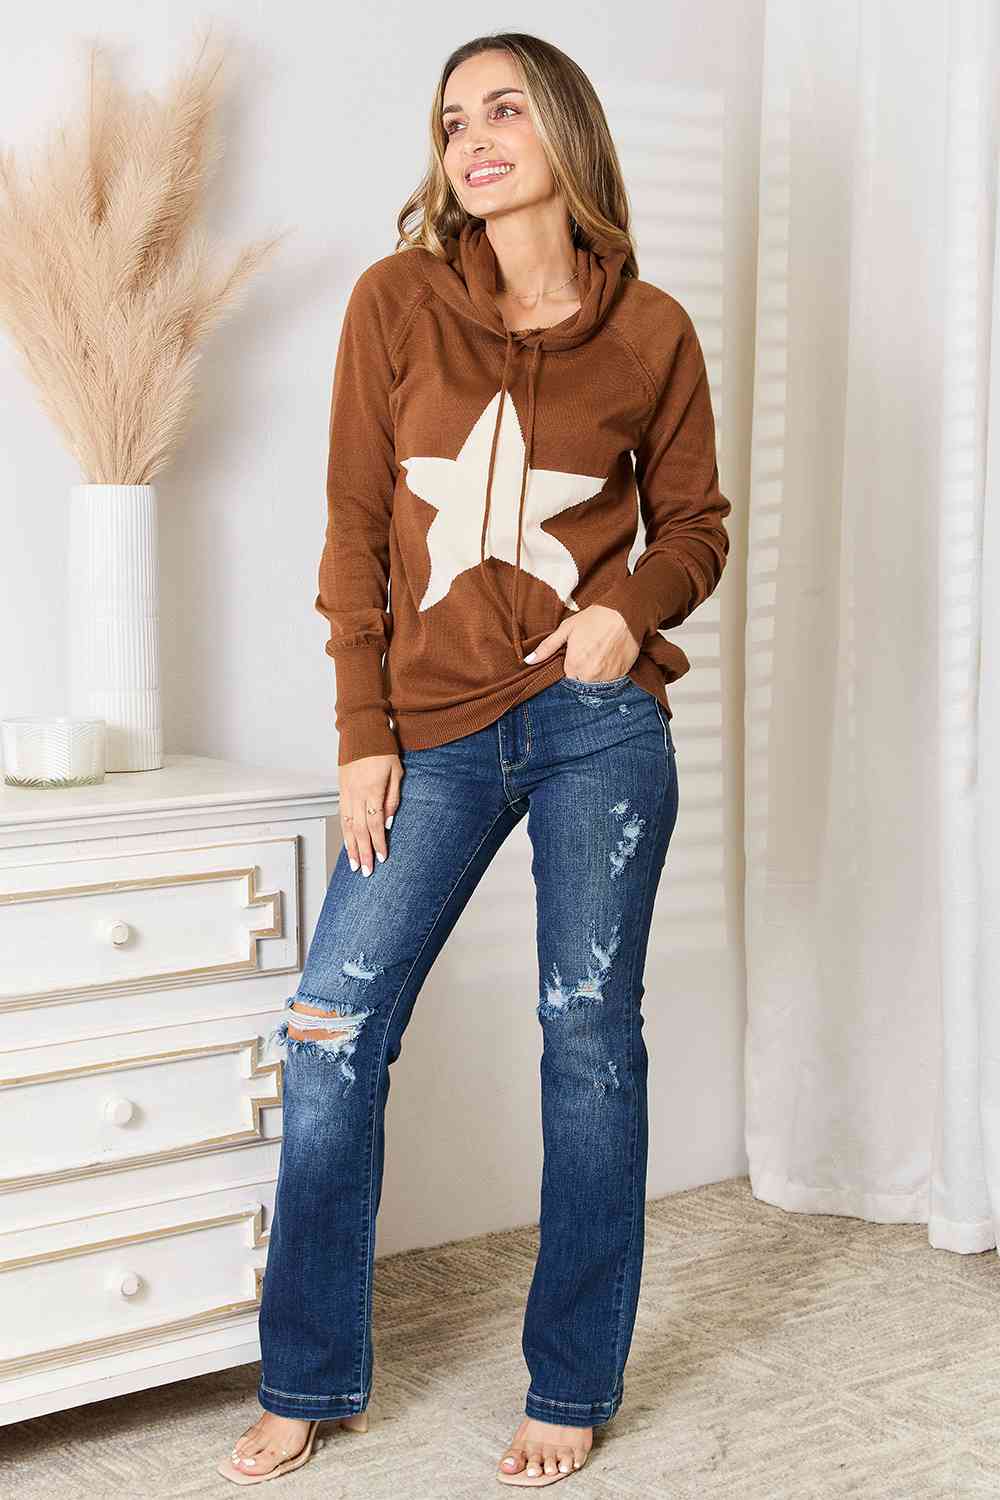 Heimish Full Size Star Graphic Hooded Sweater - TRENDMELO